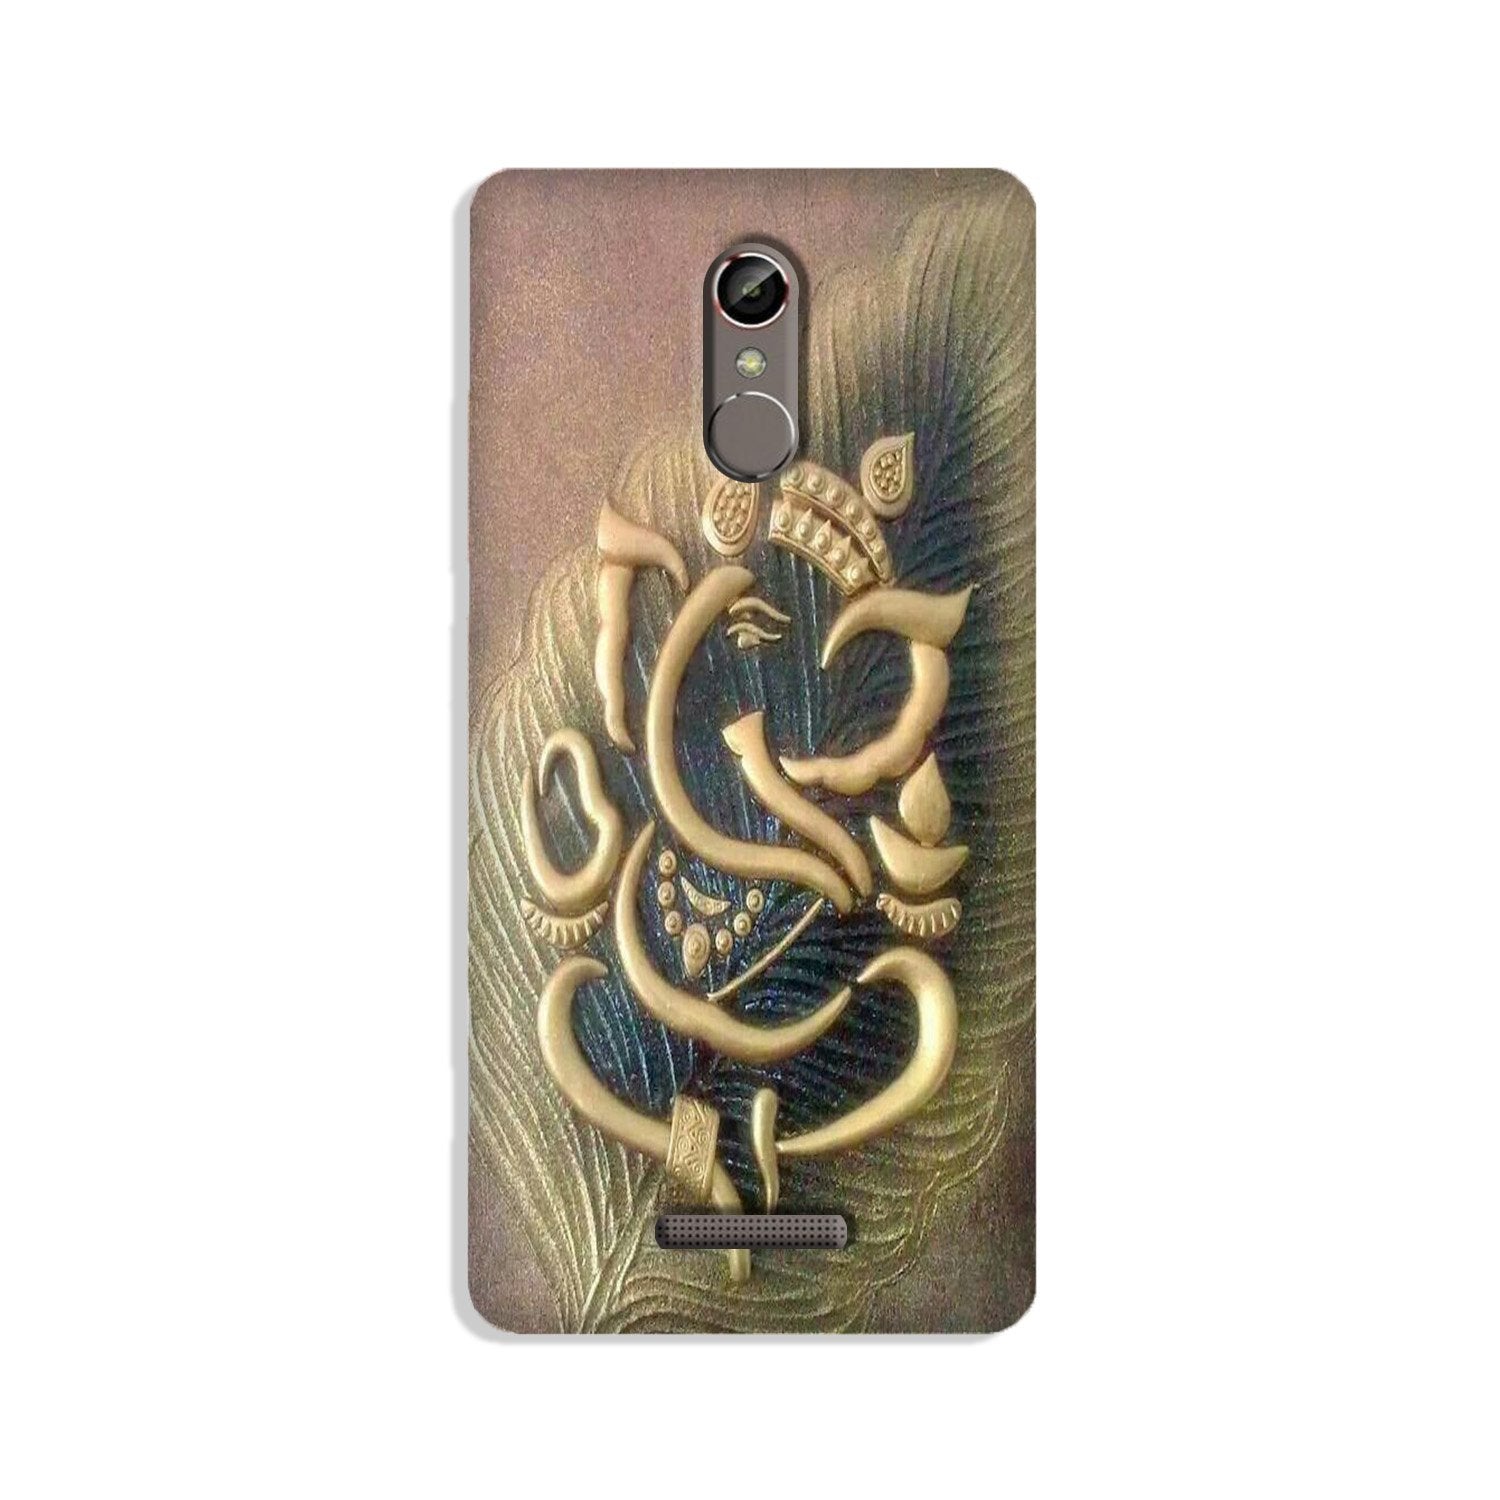 Lord Ganesha Case for Redmi Note 3